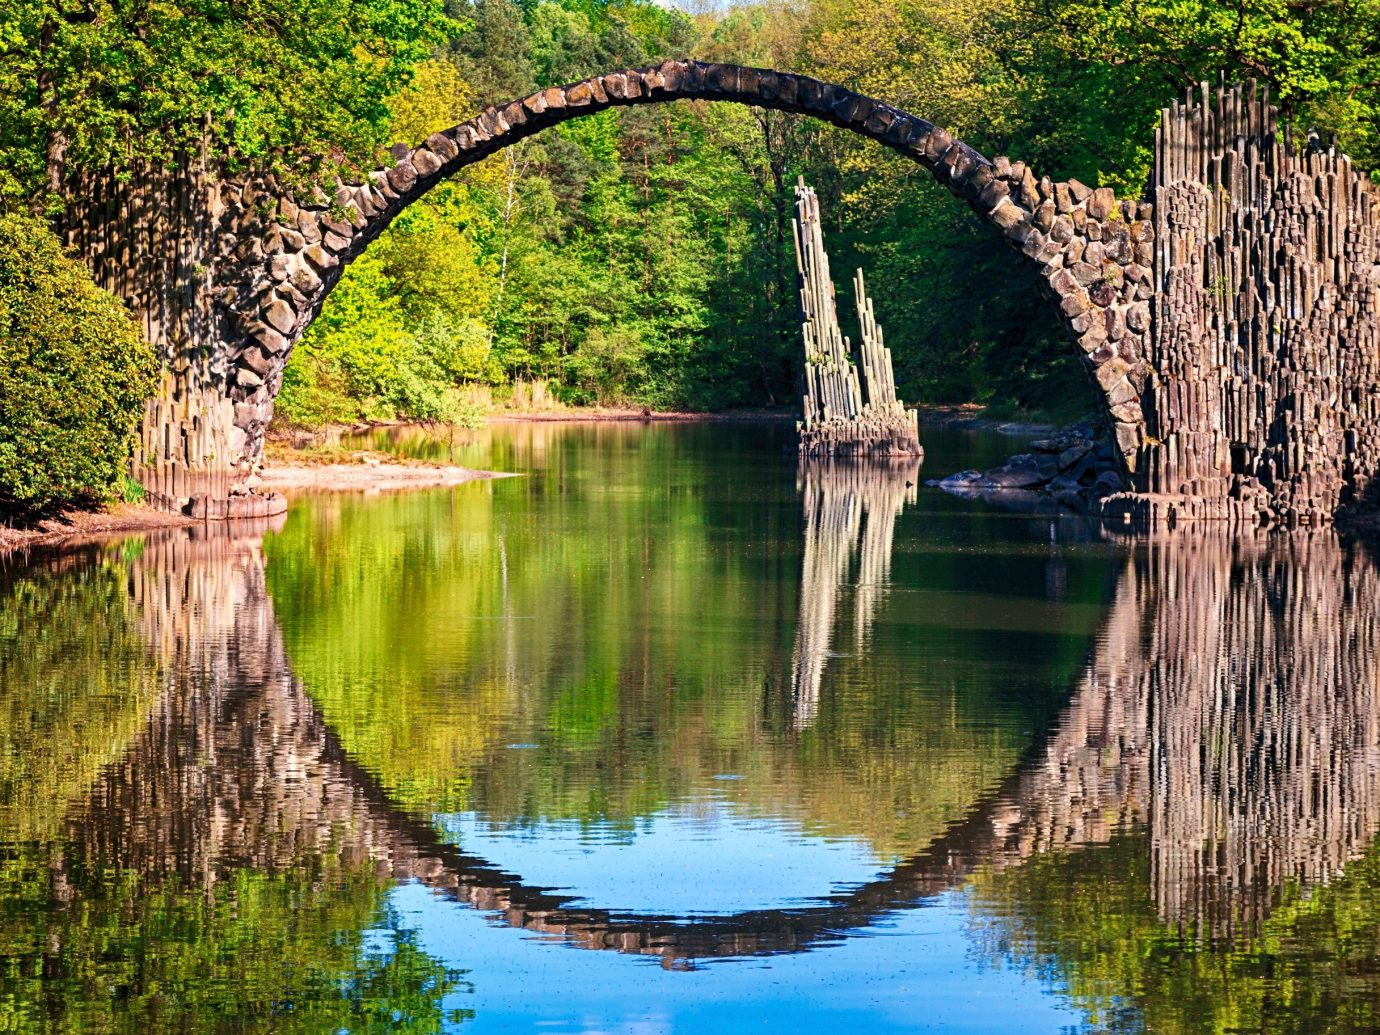 Trip Ideas tree outdoor grass water reflection River body of water bridge Lake woody plant flower pond Nature waterway autumn surrounded wetland stream park way arch wooded